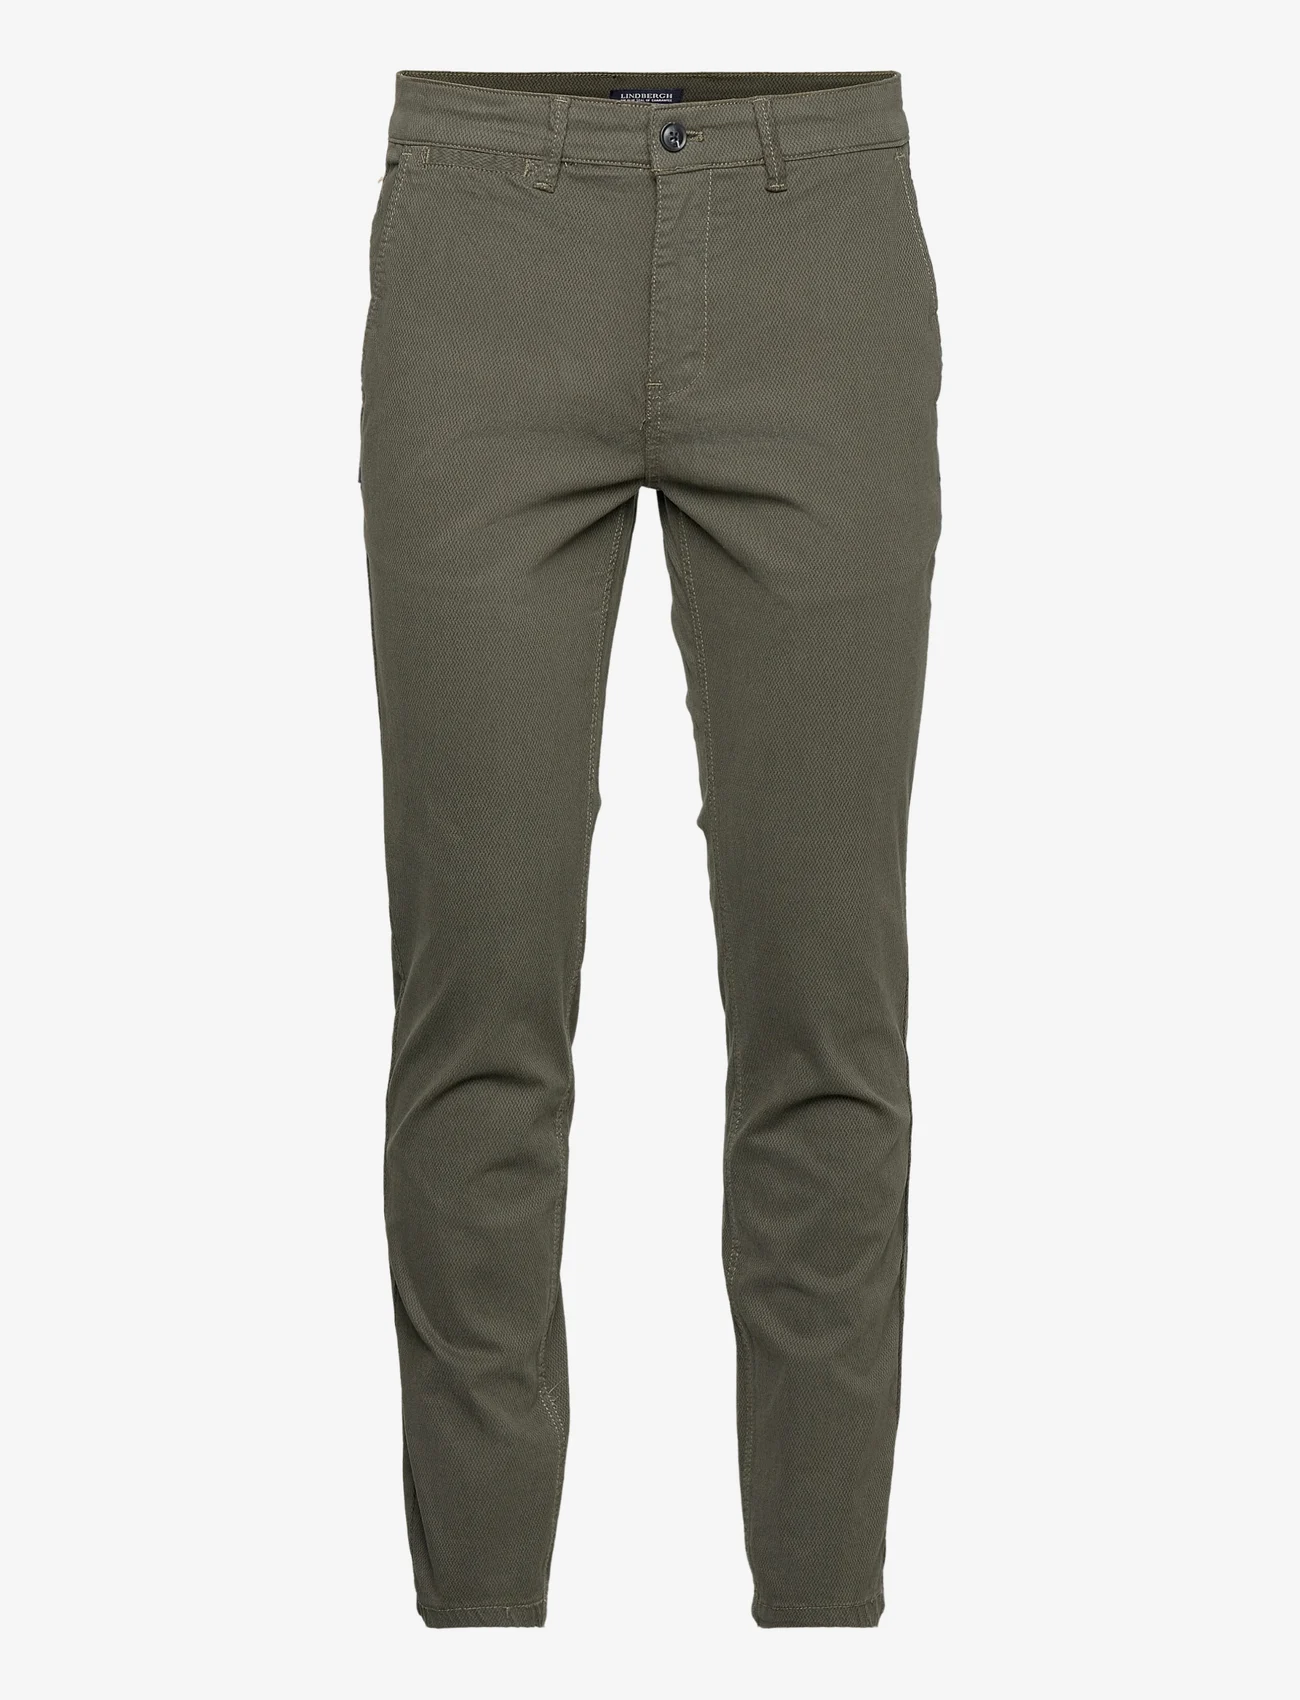 Lindbergh - Structure superflex chinos - chino's - army - 0